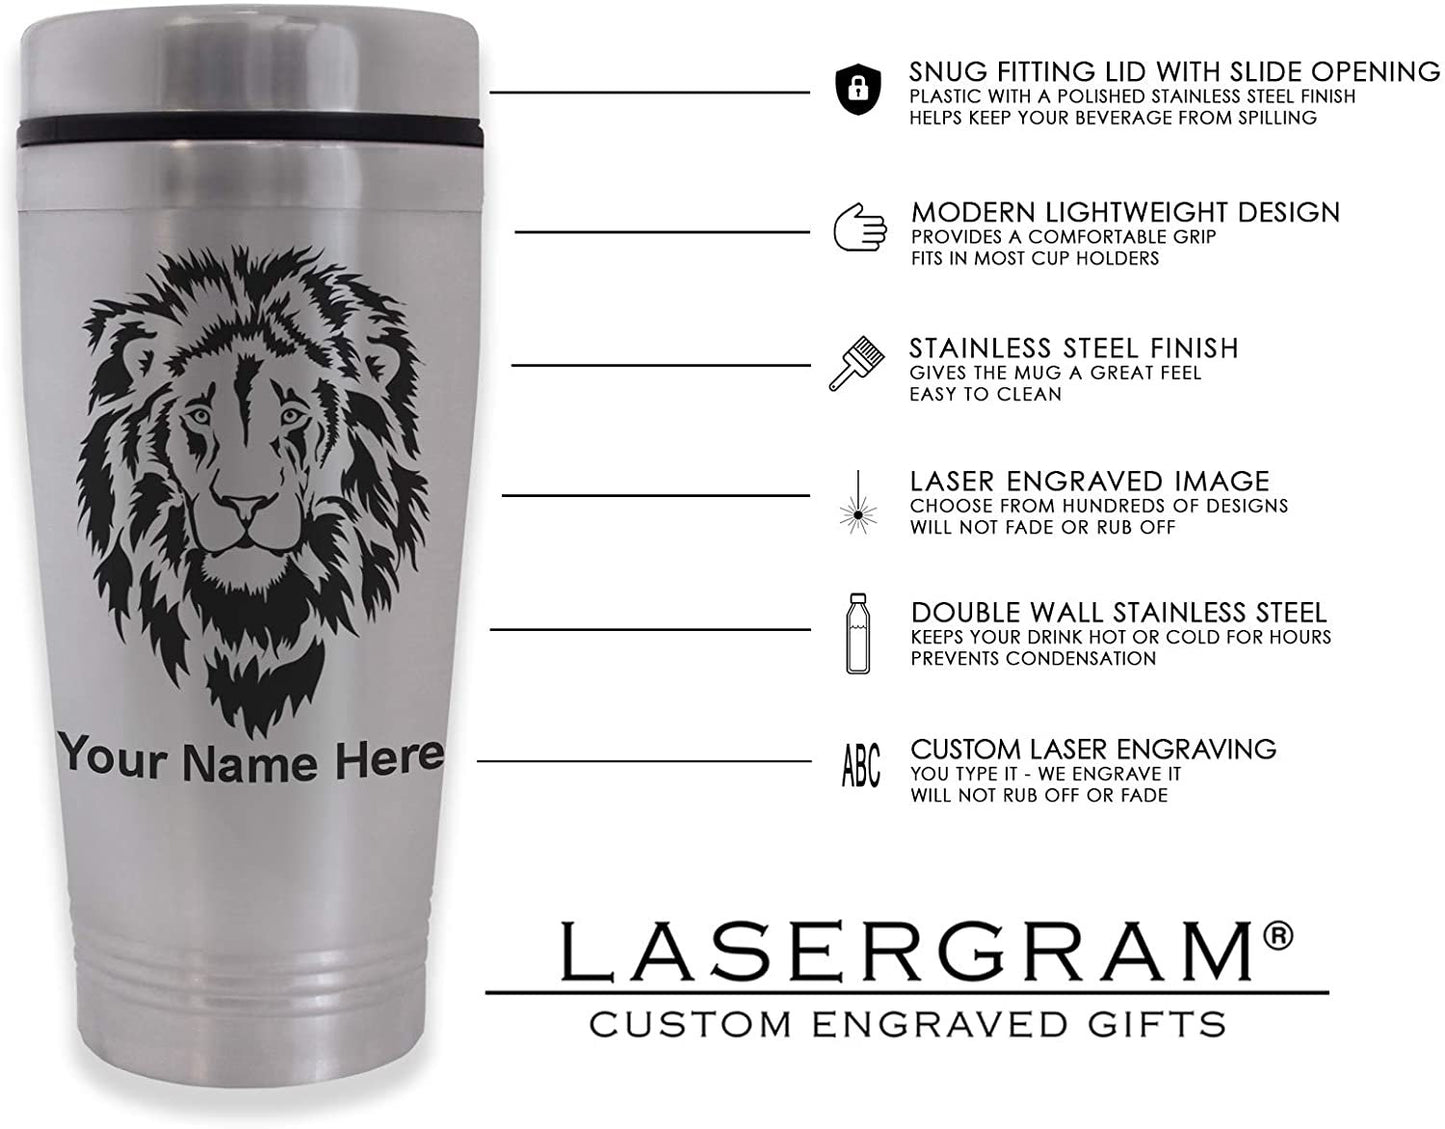 Commuter Travel Mug, Cat with Butterfly, Personalized Engraving Included